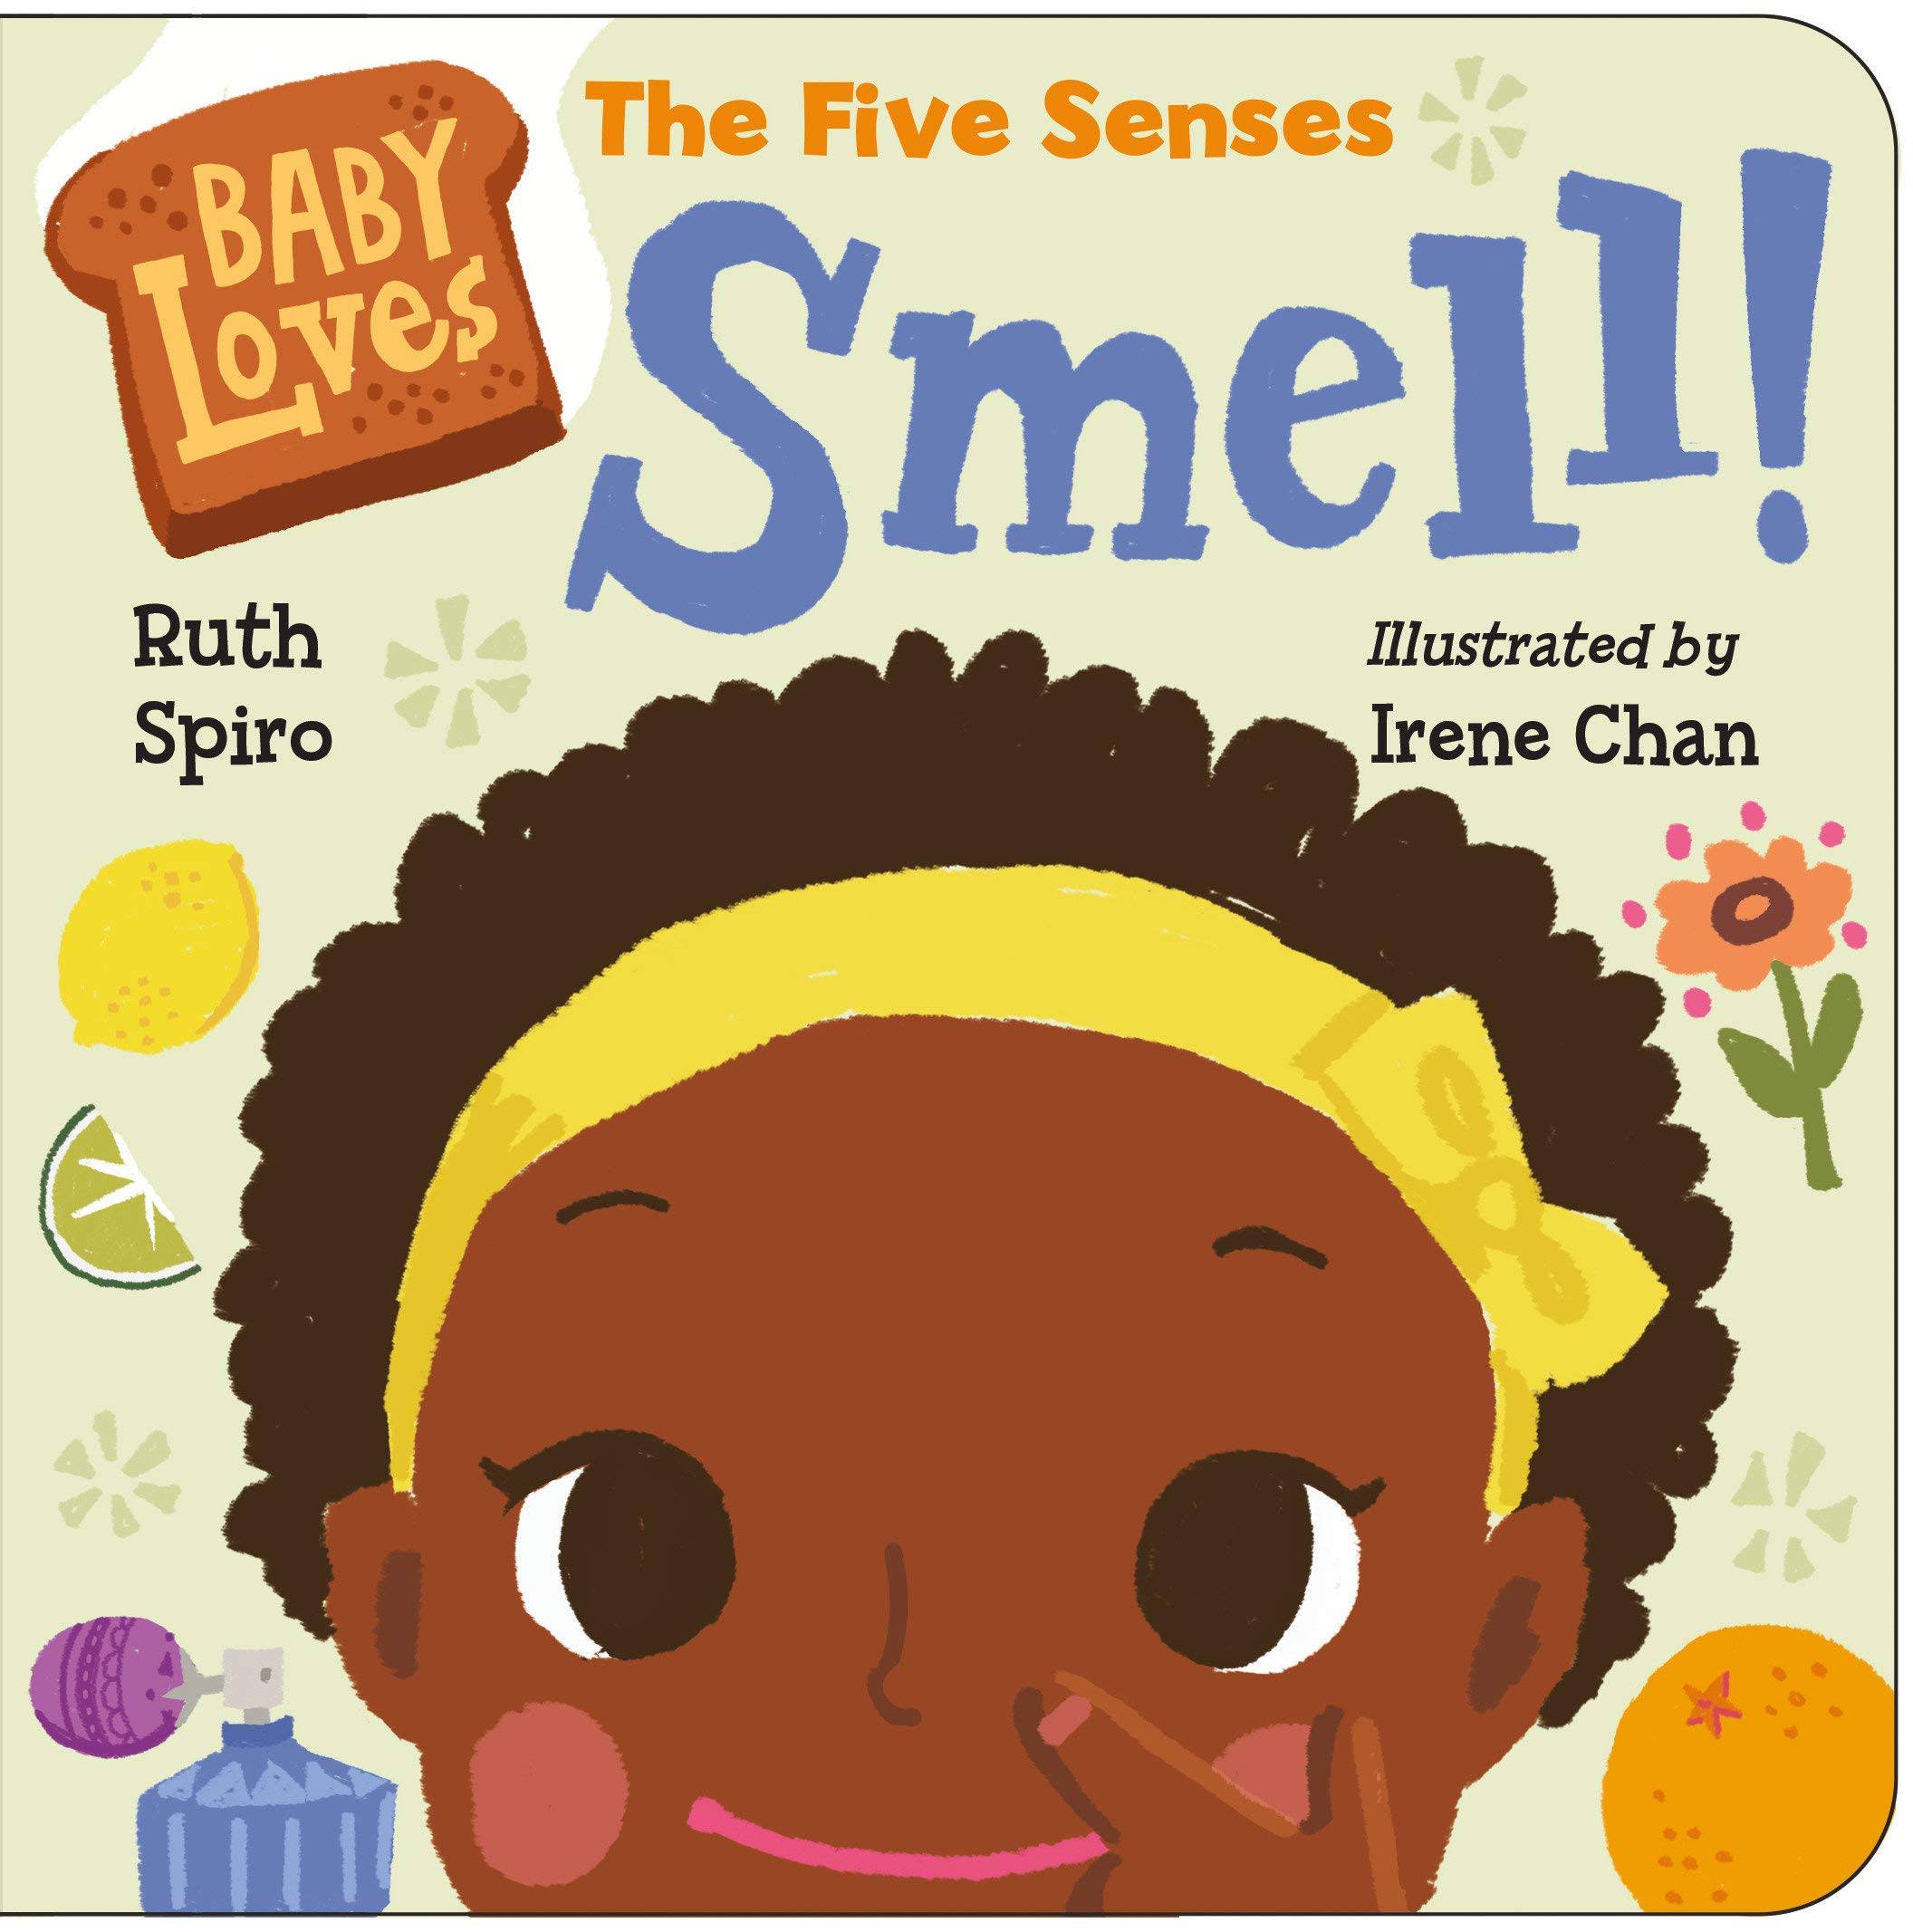 Baby Loves The Five Senses - Smell!